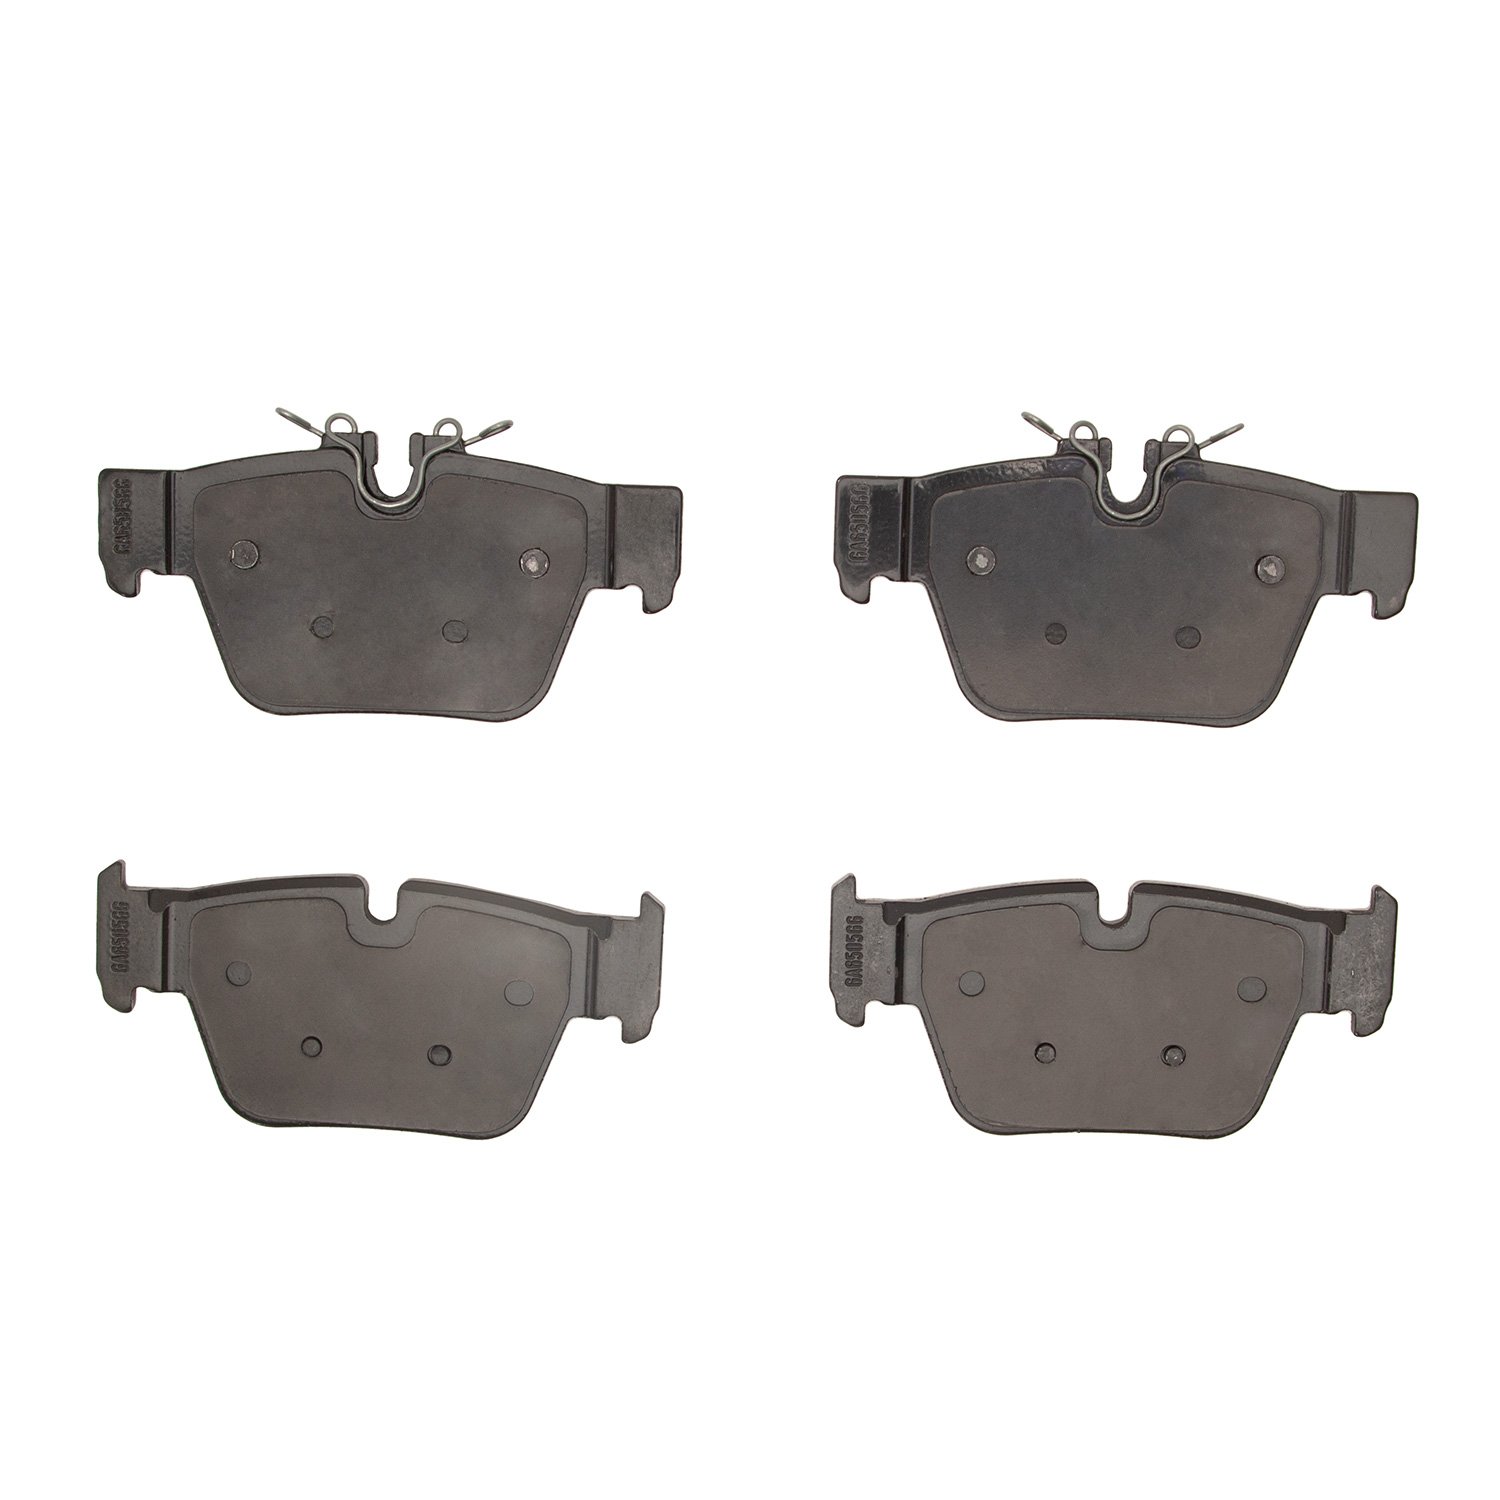 1551-2240-00 5000 Advanced Low-Metallic Brake Pads, Fits Select Multiple Makes/Models, Position: Rear